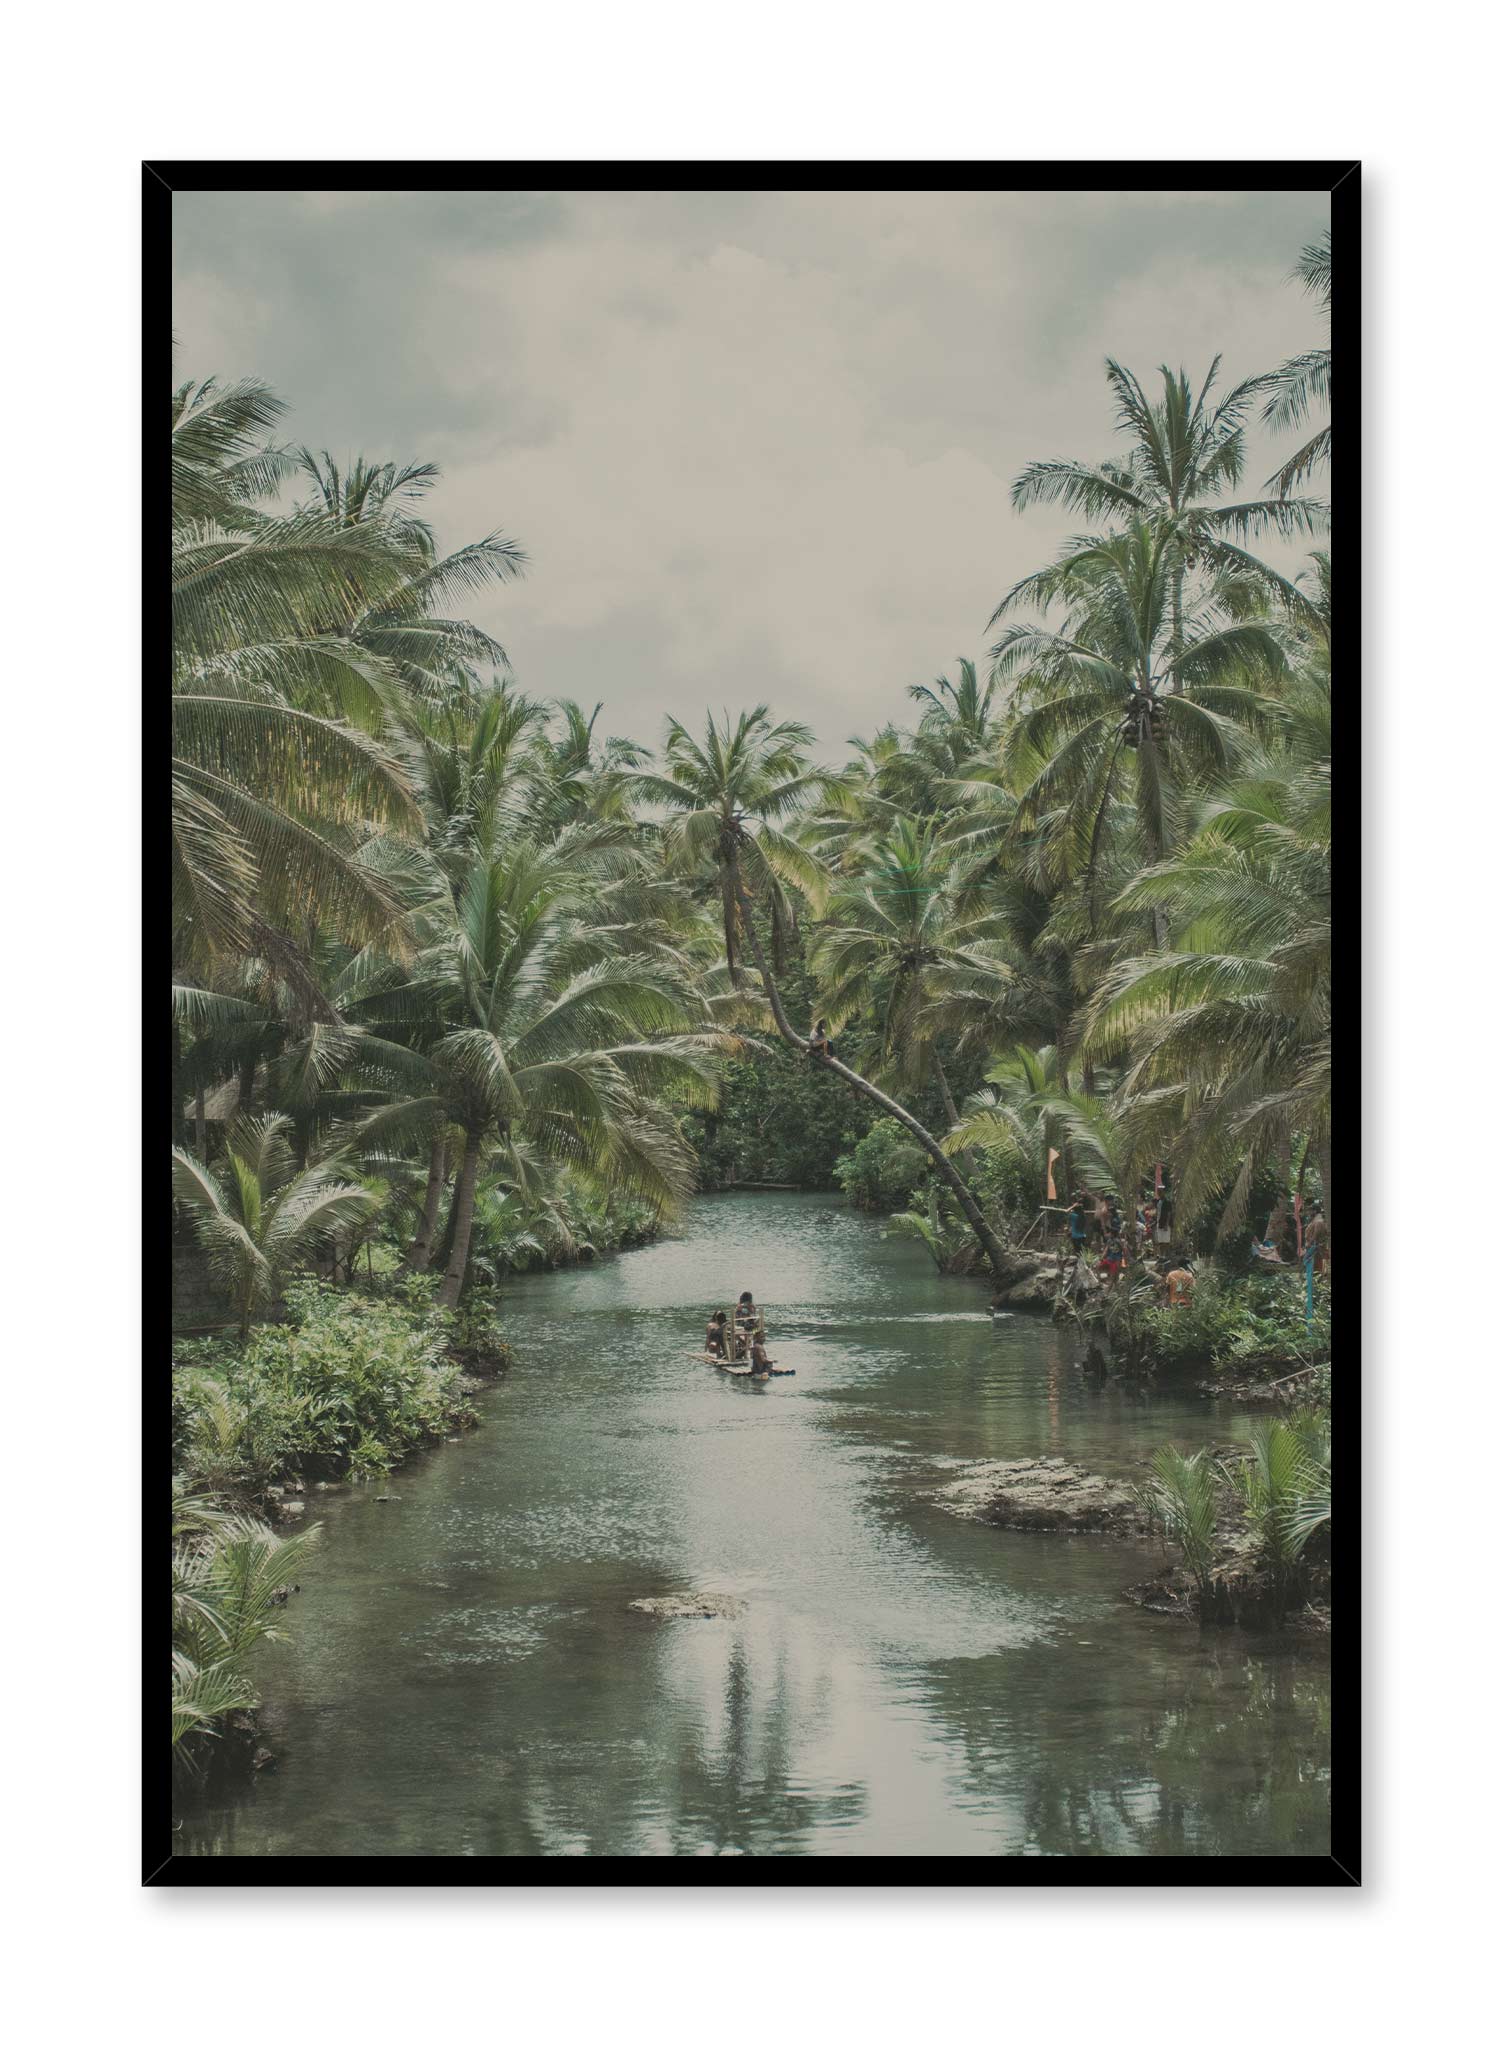 Jungle Cruise is a minimalist photography of a small wood boat travelling through a calm river in the jungle by Opposite Wall.